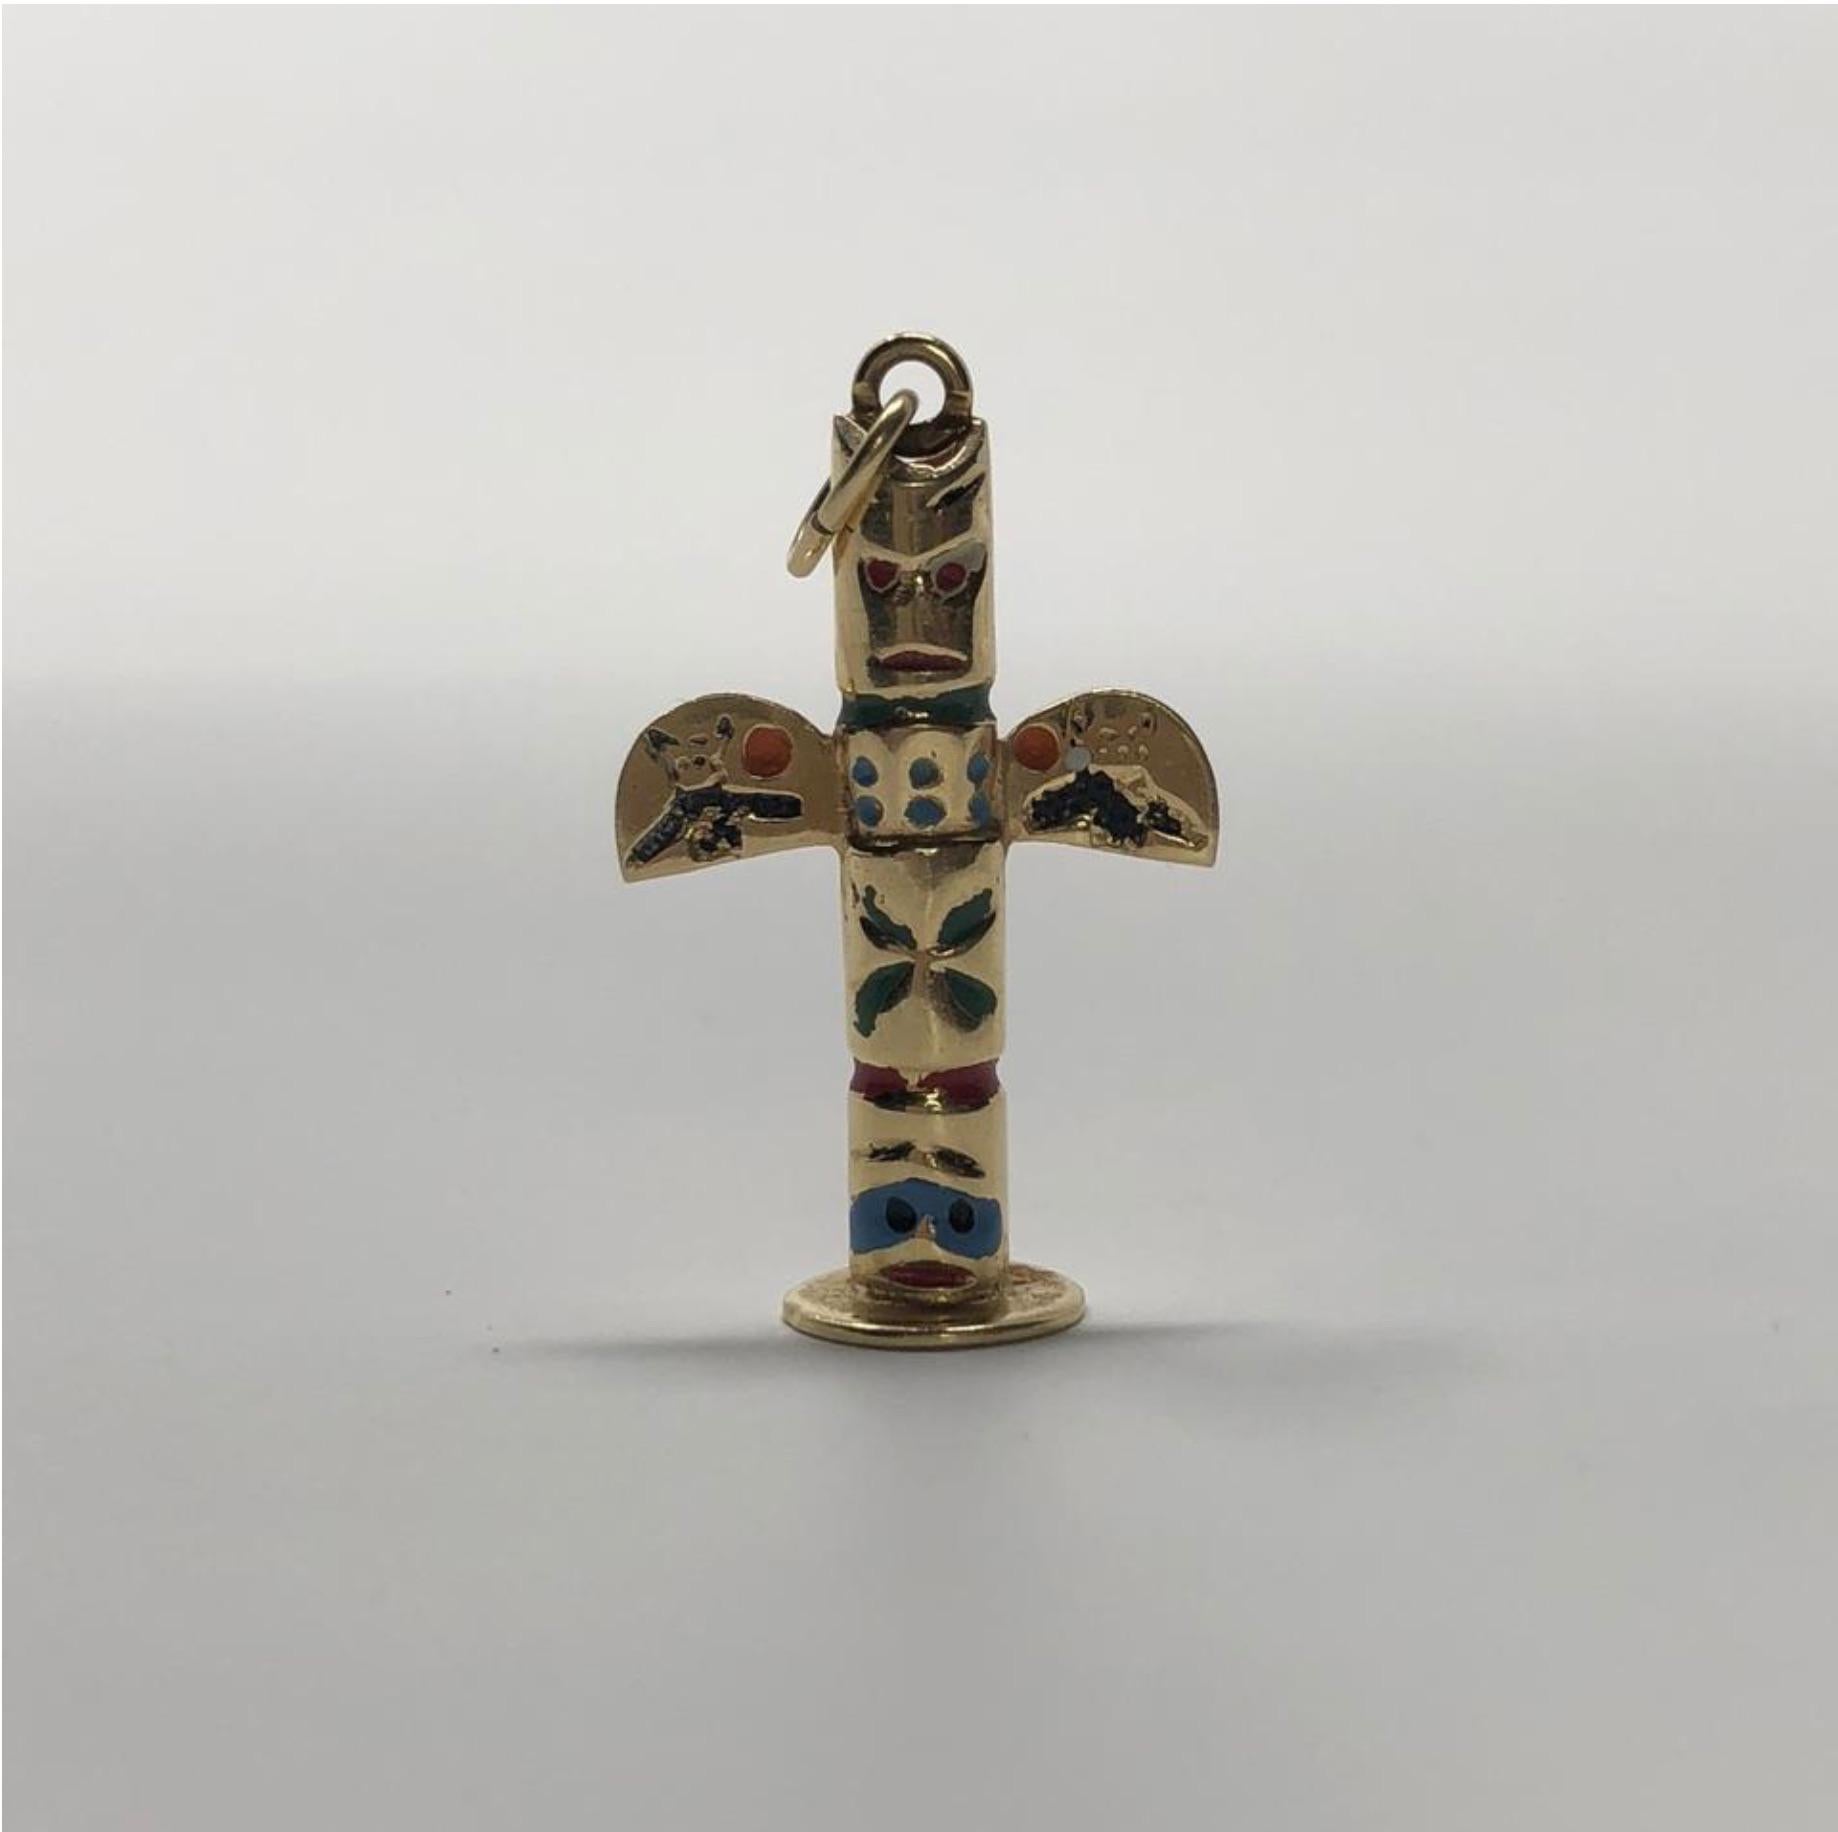 MODEL - Vintage 14k Gold with Enamel Totem Pole Pendent Charm

CONDITION - Exceptional! No signs of wear.

SKU - 2374-FL

ORIGINAL RETAIL PRICE - 250 + tax

MATERIAL - 14k Gold

WEIGHT - 3.1 grams

DIMENSIONS - L.6 x H1 (1.2 with bail) x D.25

COMES